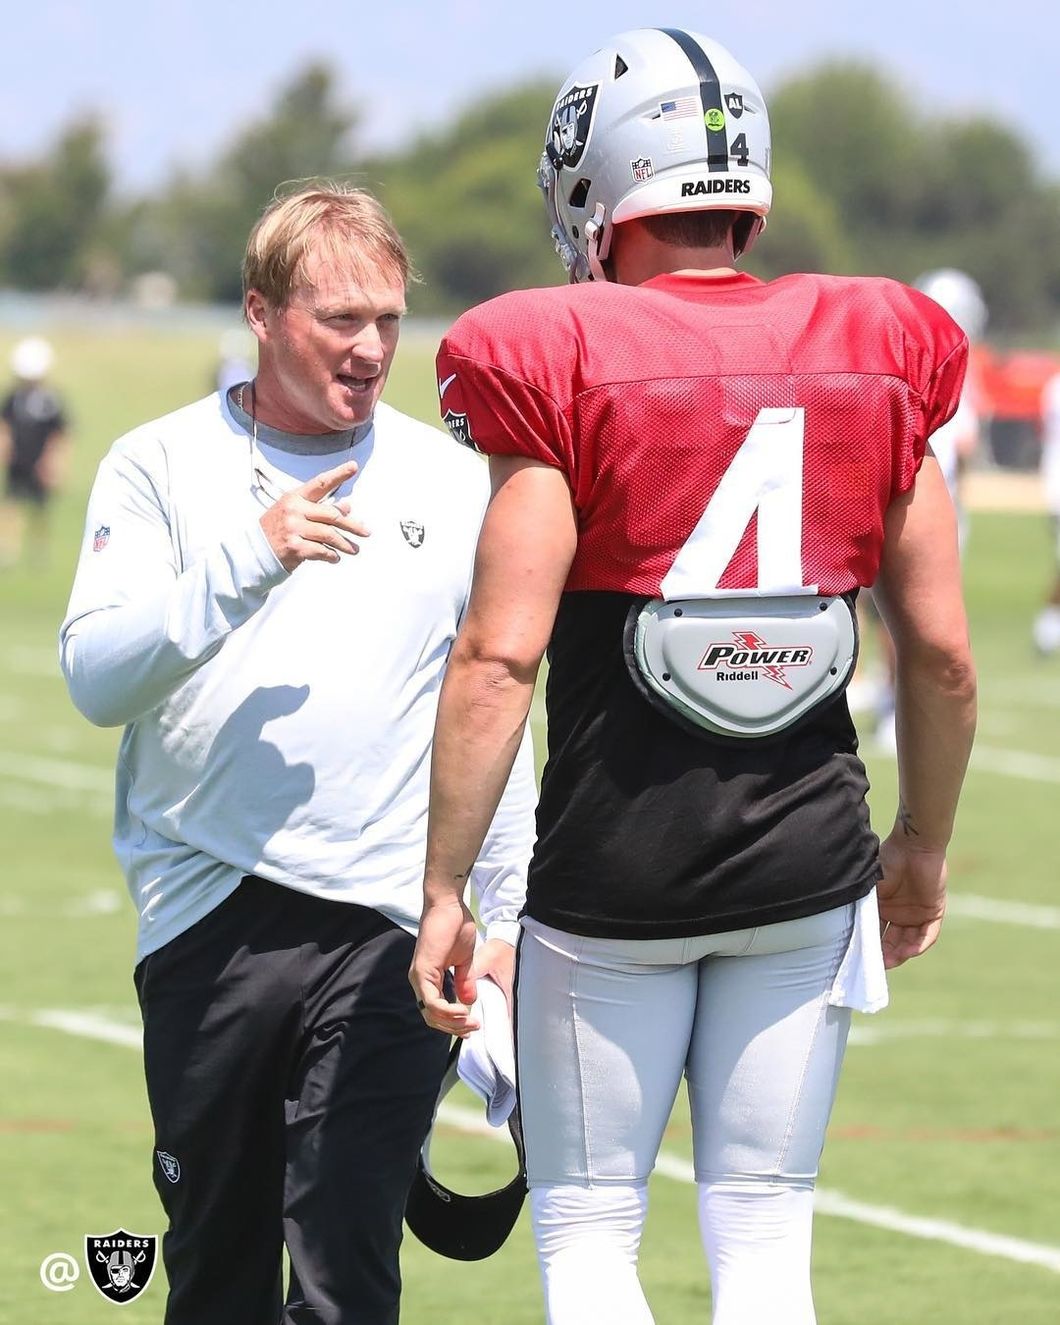 New Look Raiders Hoping to Surprise This Season